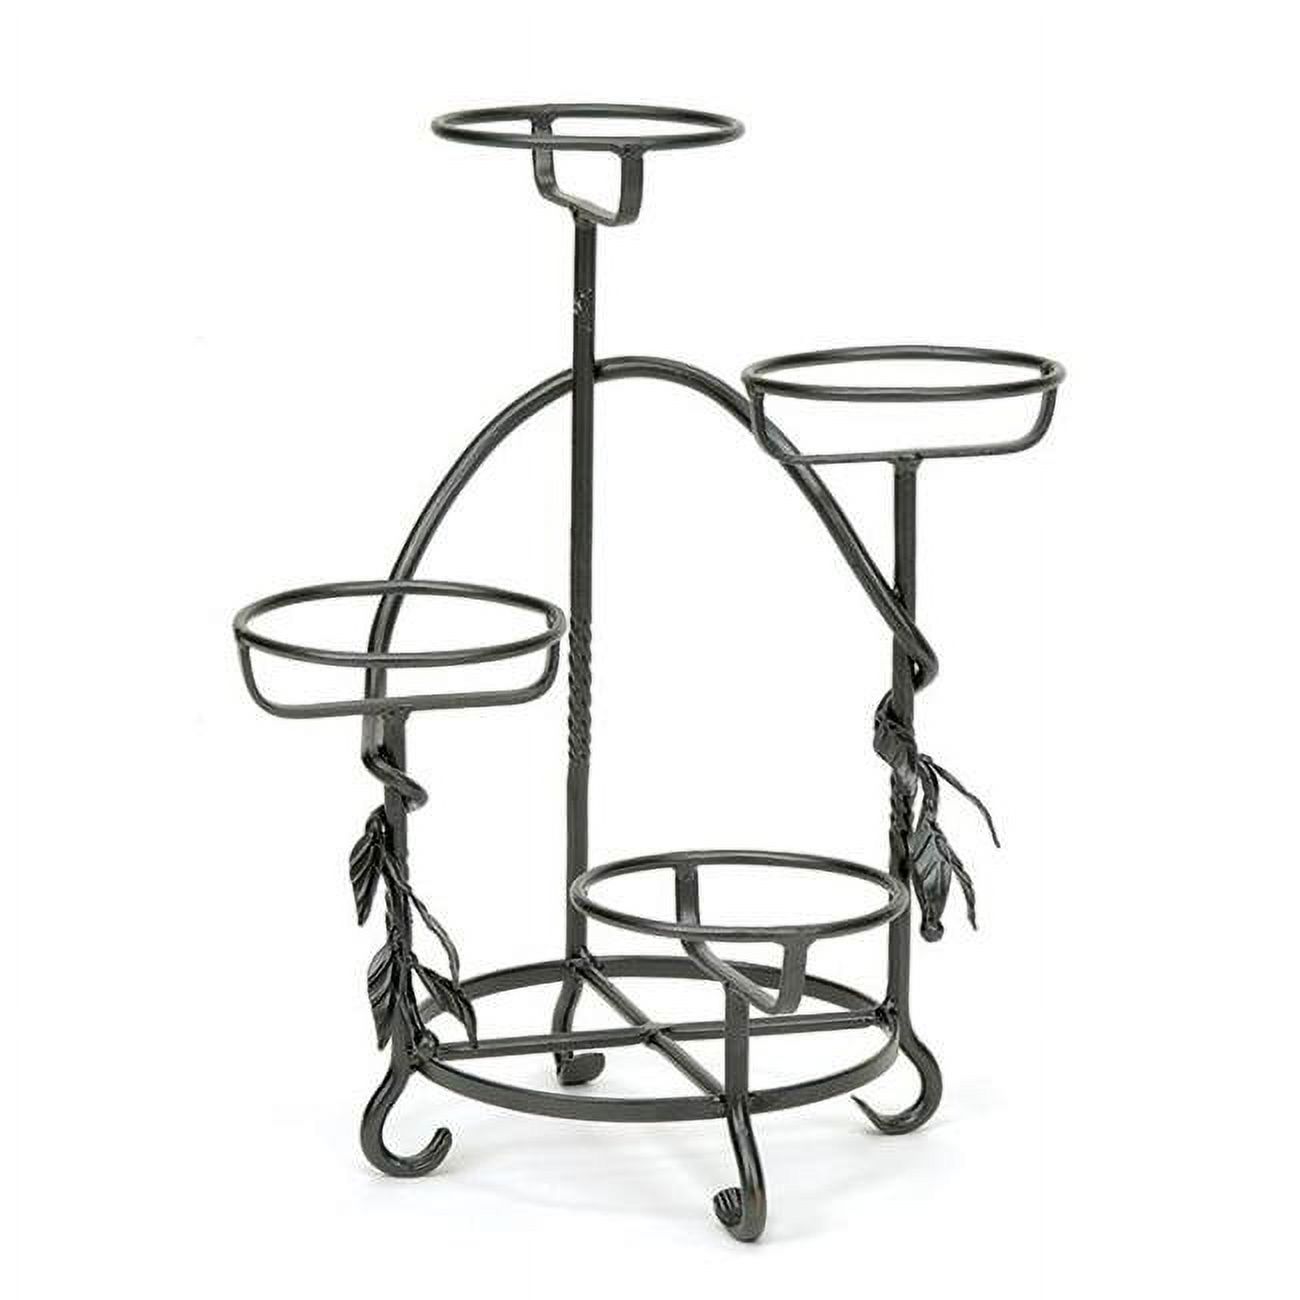 Achla FC-05 15''W x 18'' H Cascading Plant Stand in Graphite Powder Coated - image 1 of 3